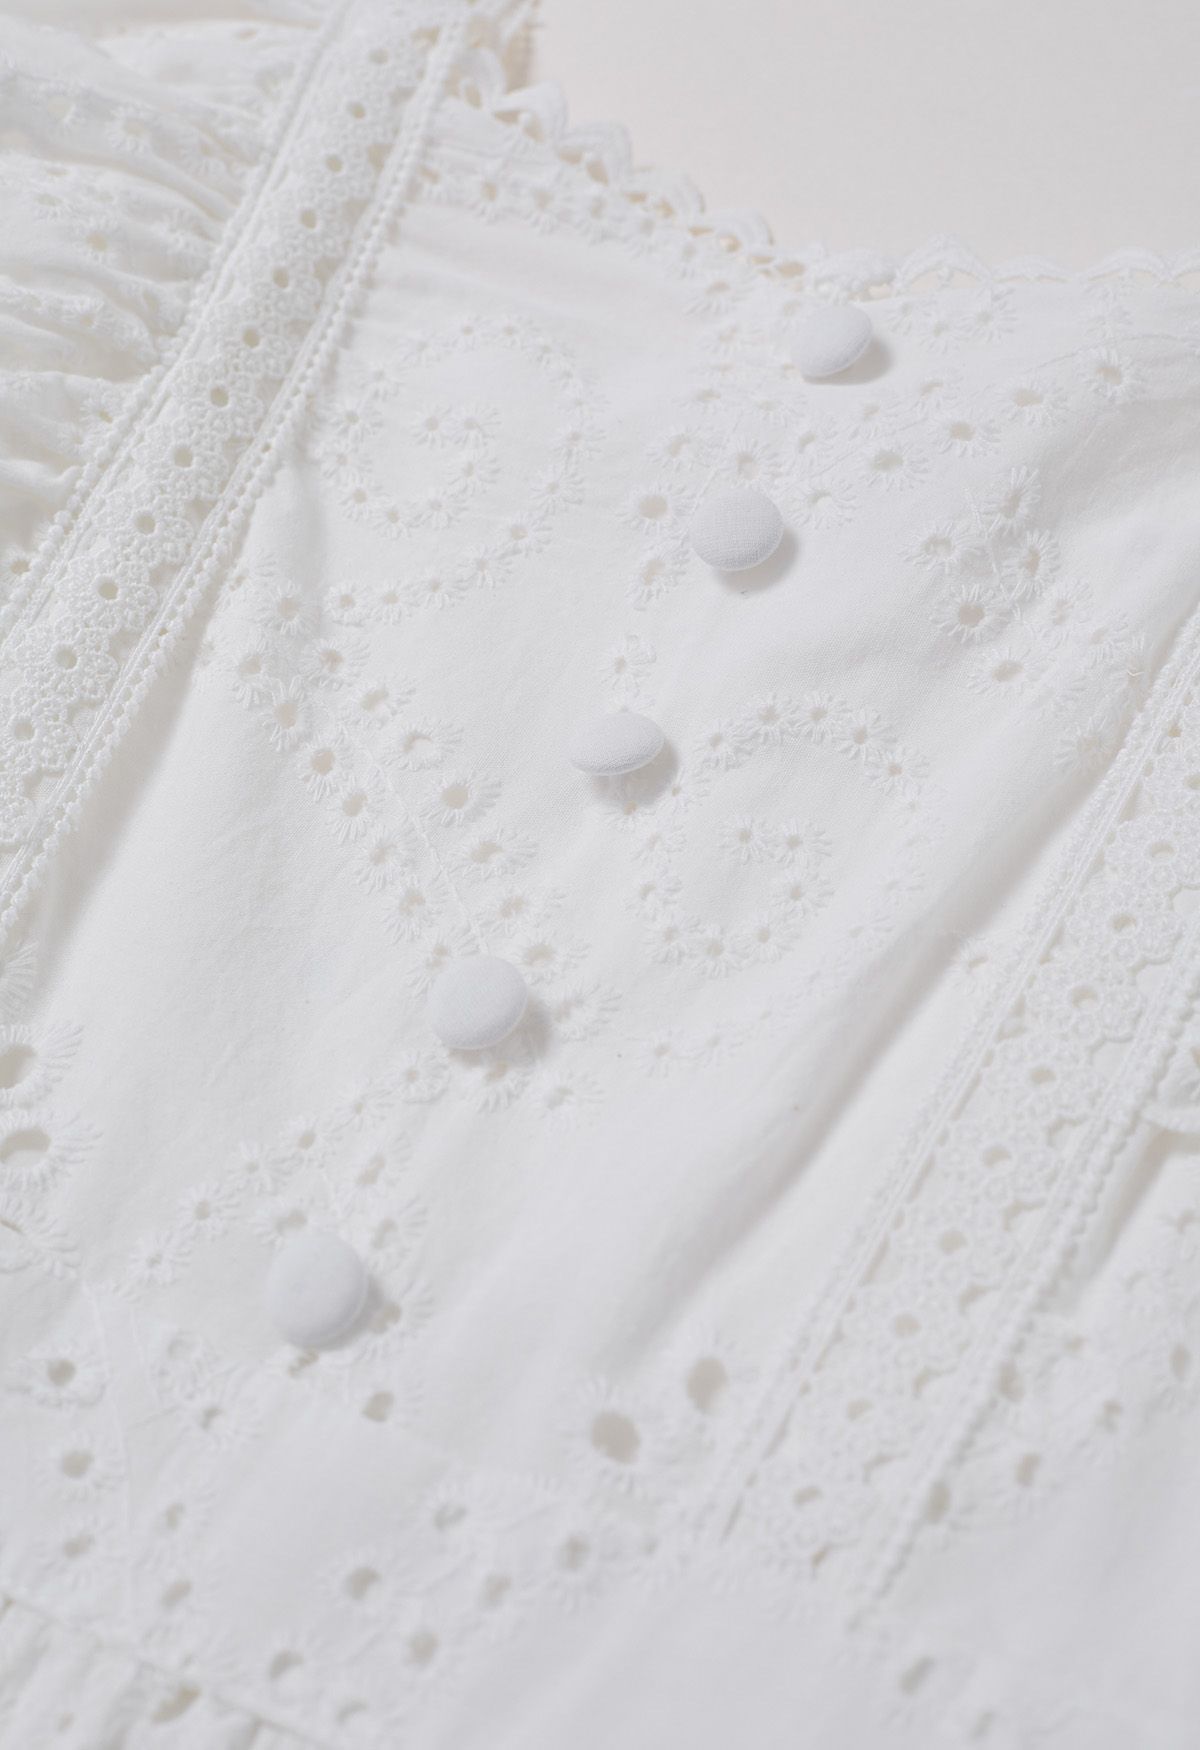 Sweetheart Neckline Eyelet Embroidery Maxi Dress in White